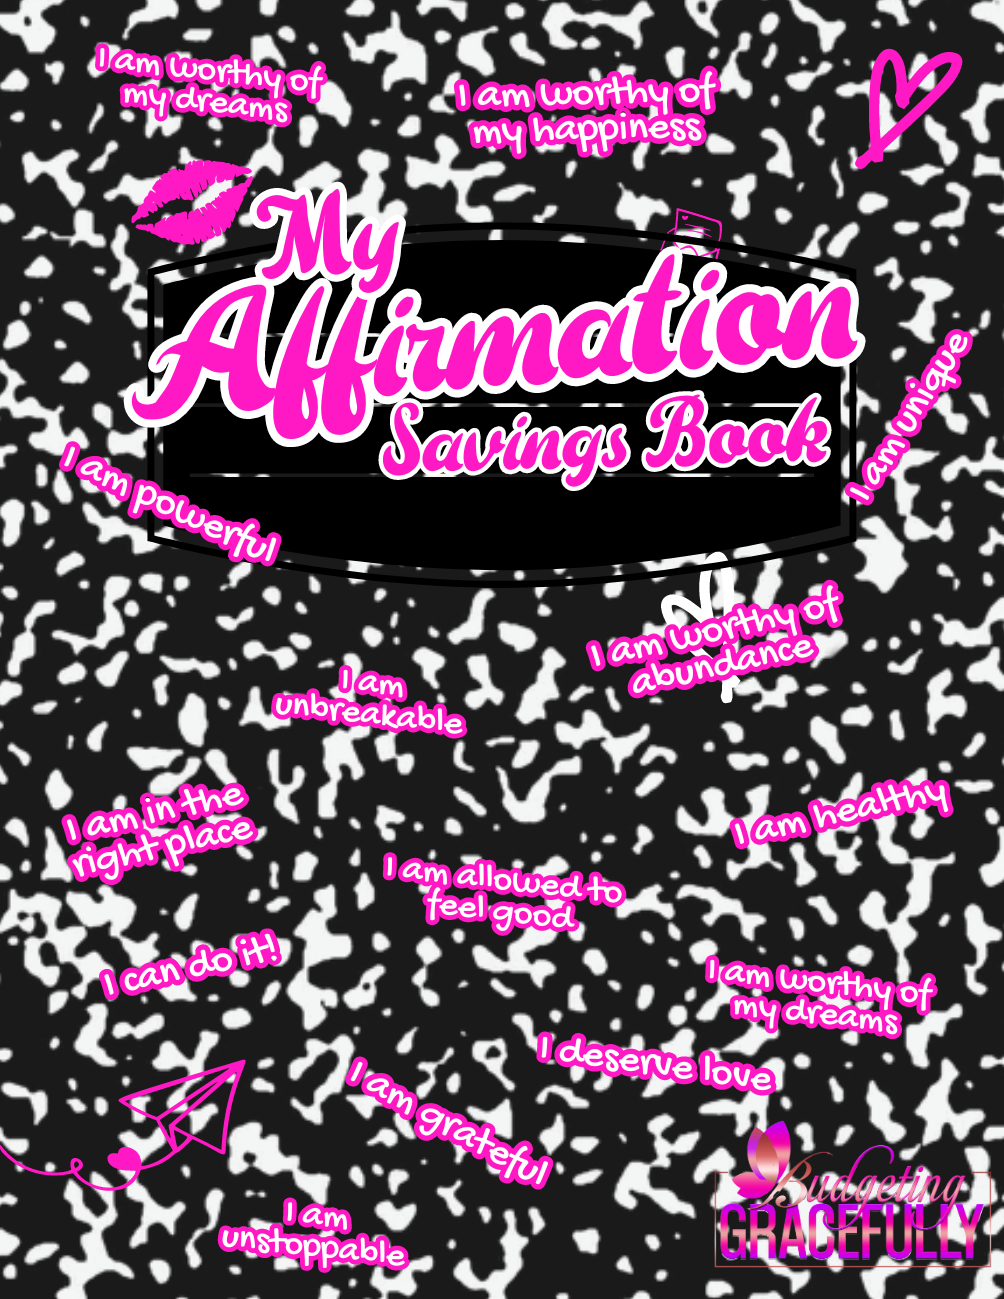 My Affirmation Savings Challenge Book Download